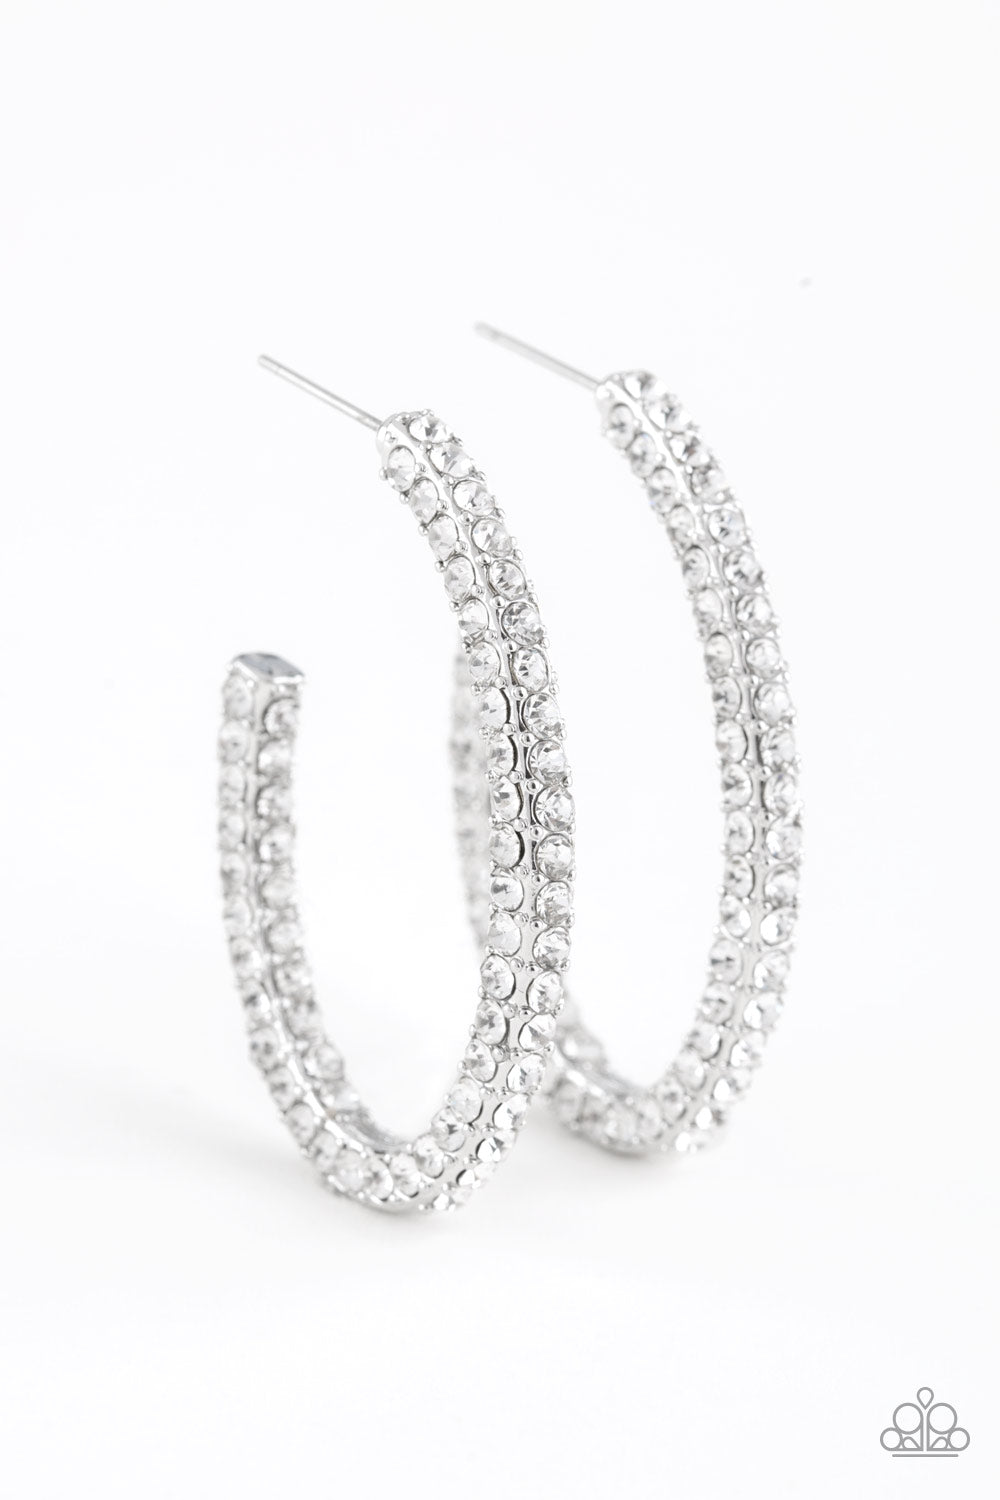 Big Winner - White Item #E385 Glassy white rhinestones are encrusted along three sides of an abstract silver hoop for a glamorous look. Earring attaches to a standard post fitting. Hoop measures 1" in diameter. All Paparazzi Accessories are lead free and nickel free!  Sold as one pair of hoop earrings.